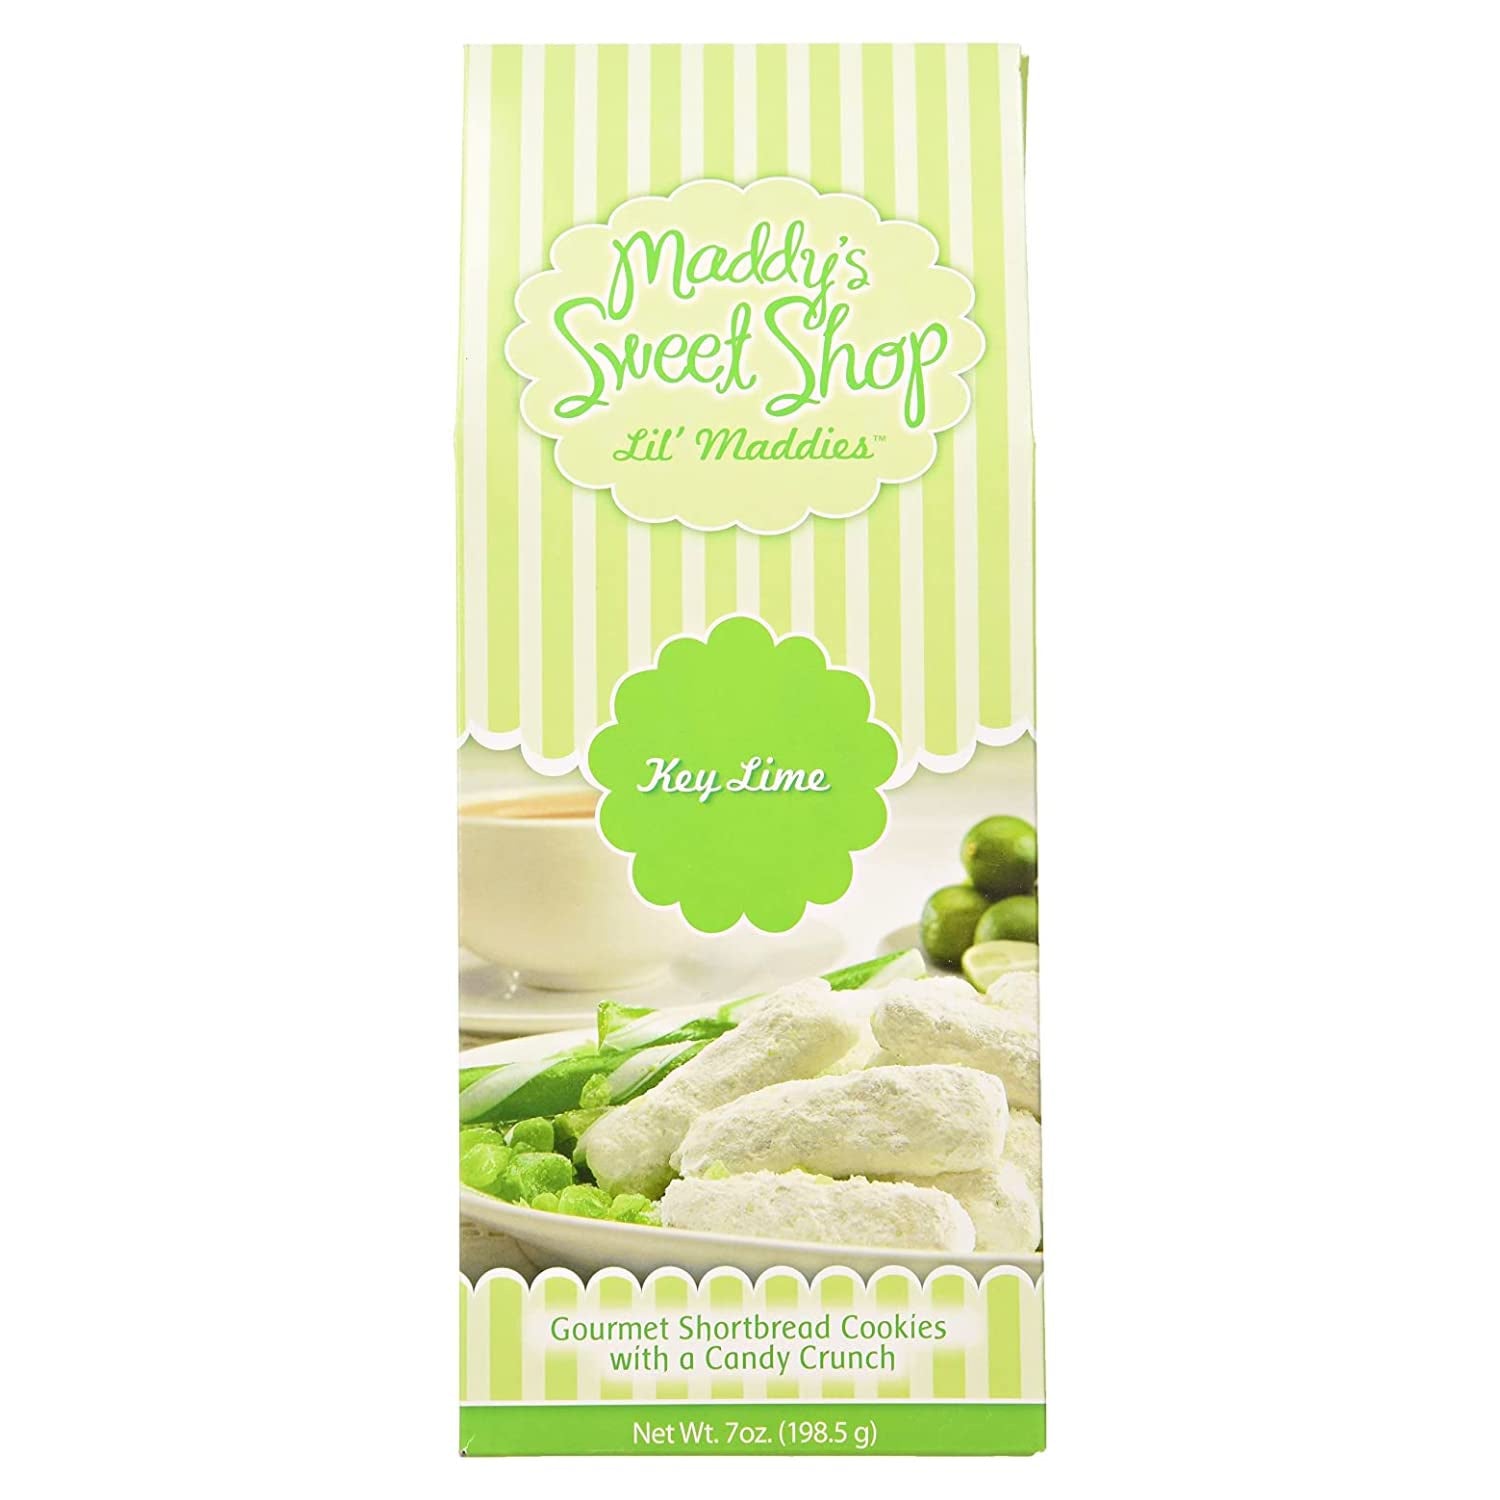 Maddy's Sweet Shop Key Lime Shortbread Cookies 7oz